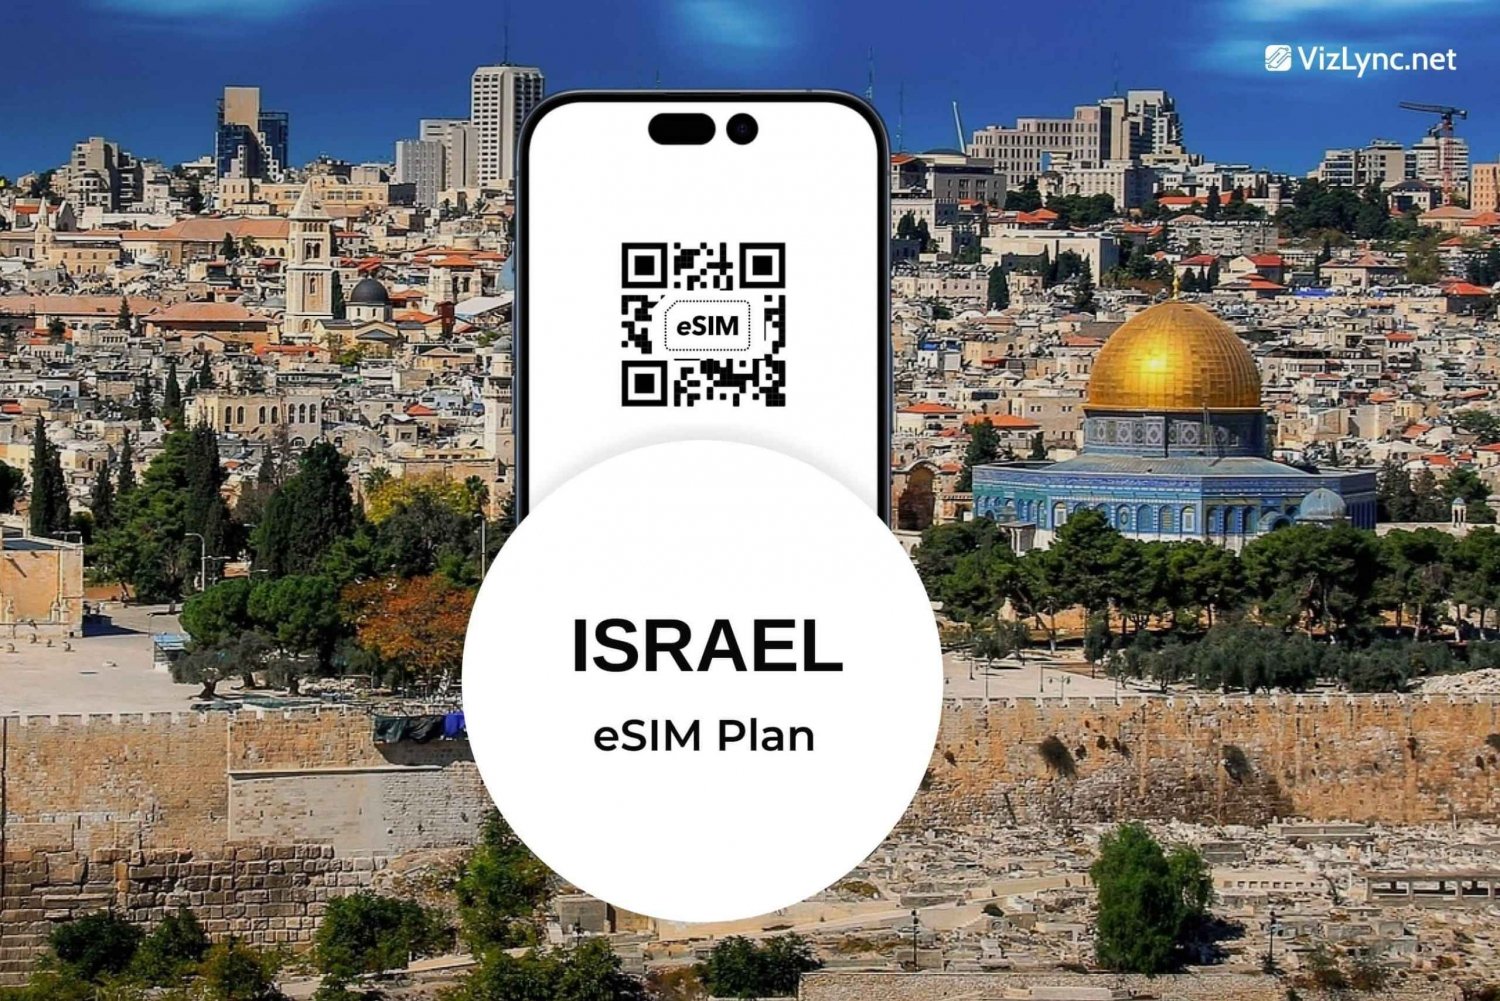 Israel Travel eSIM plan with Super fast Mobile Data